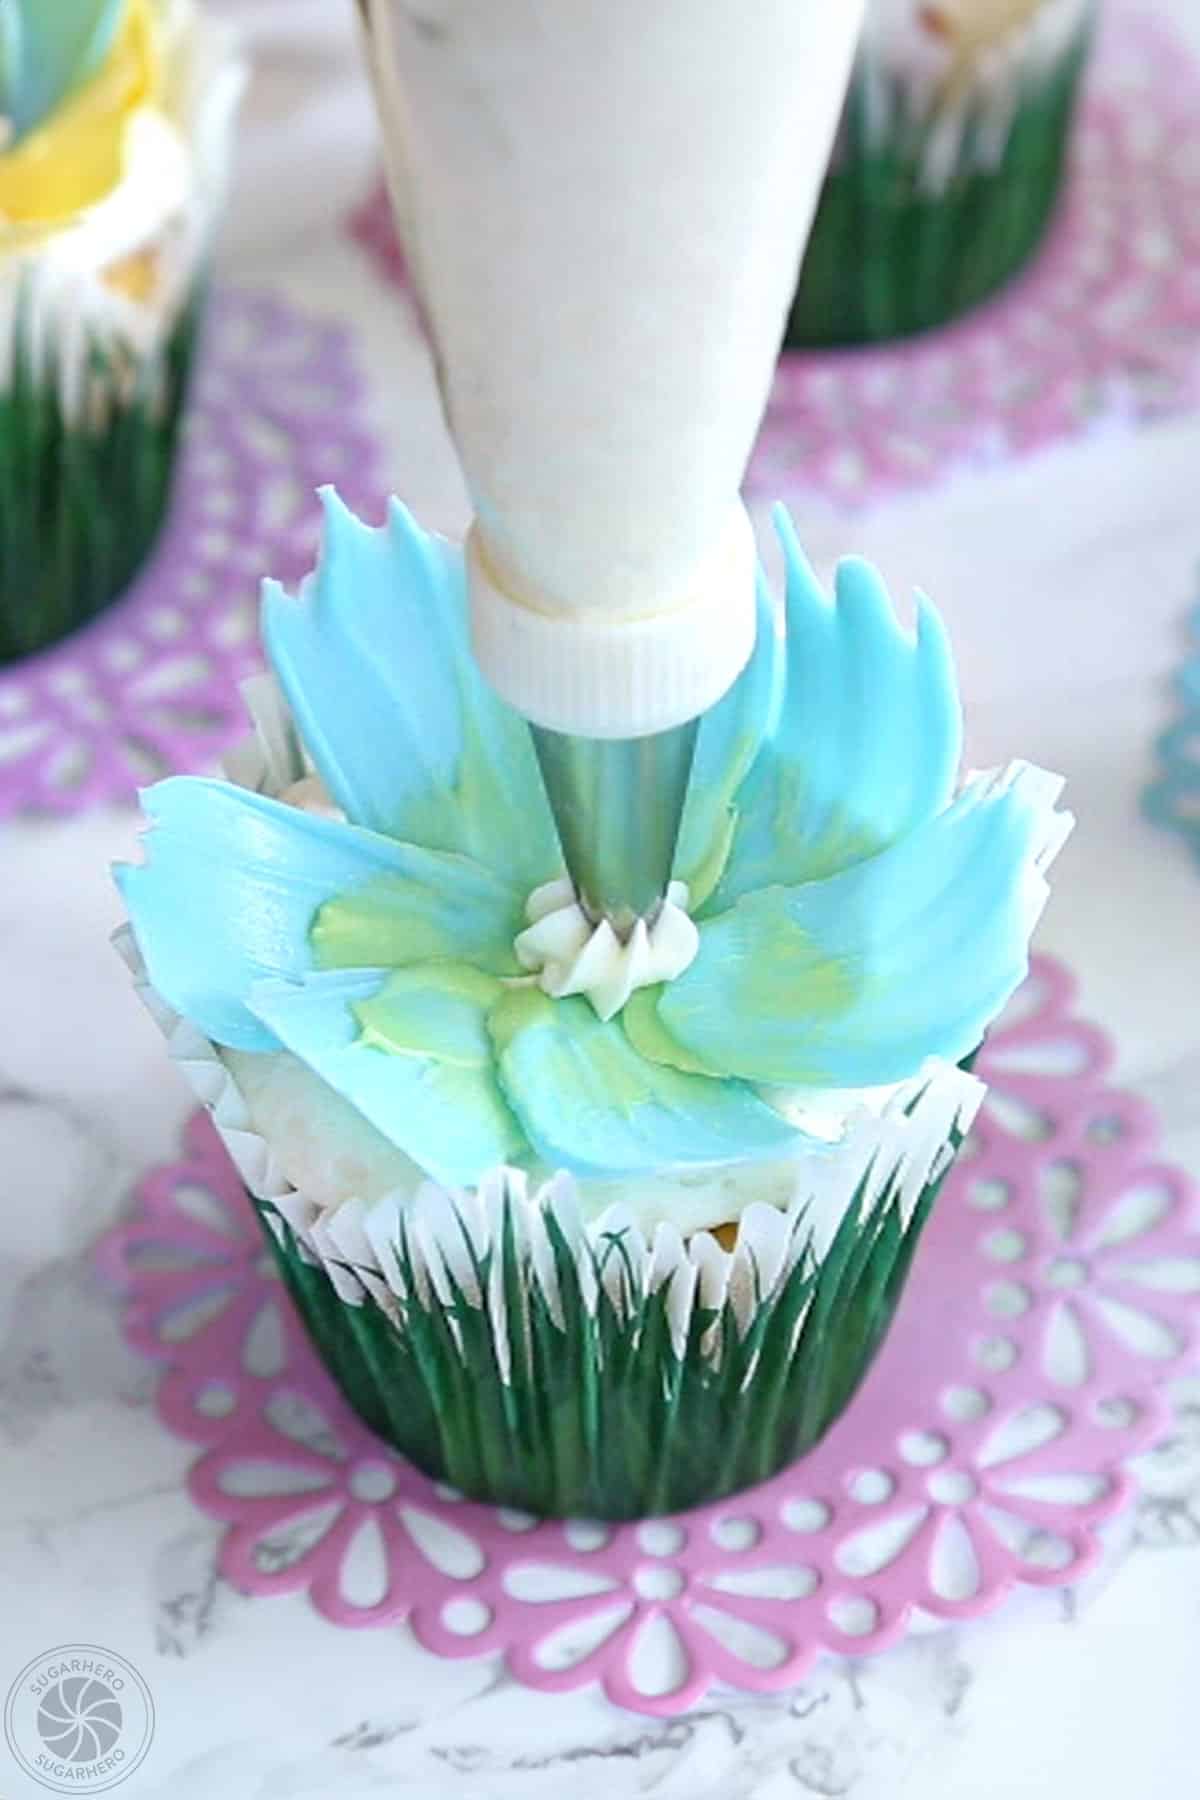 Piping a dab of white buttercream in the middle of a chocolate flower.